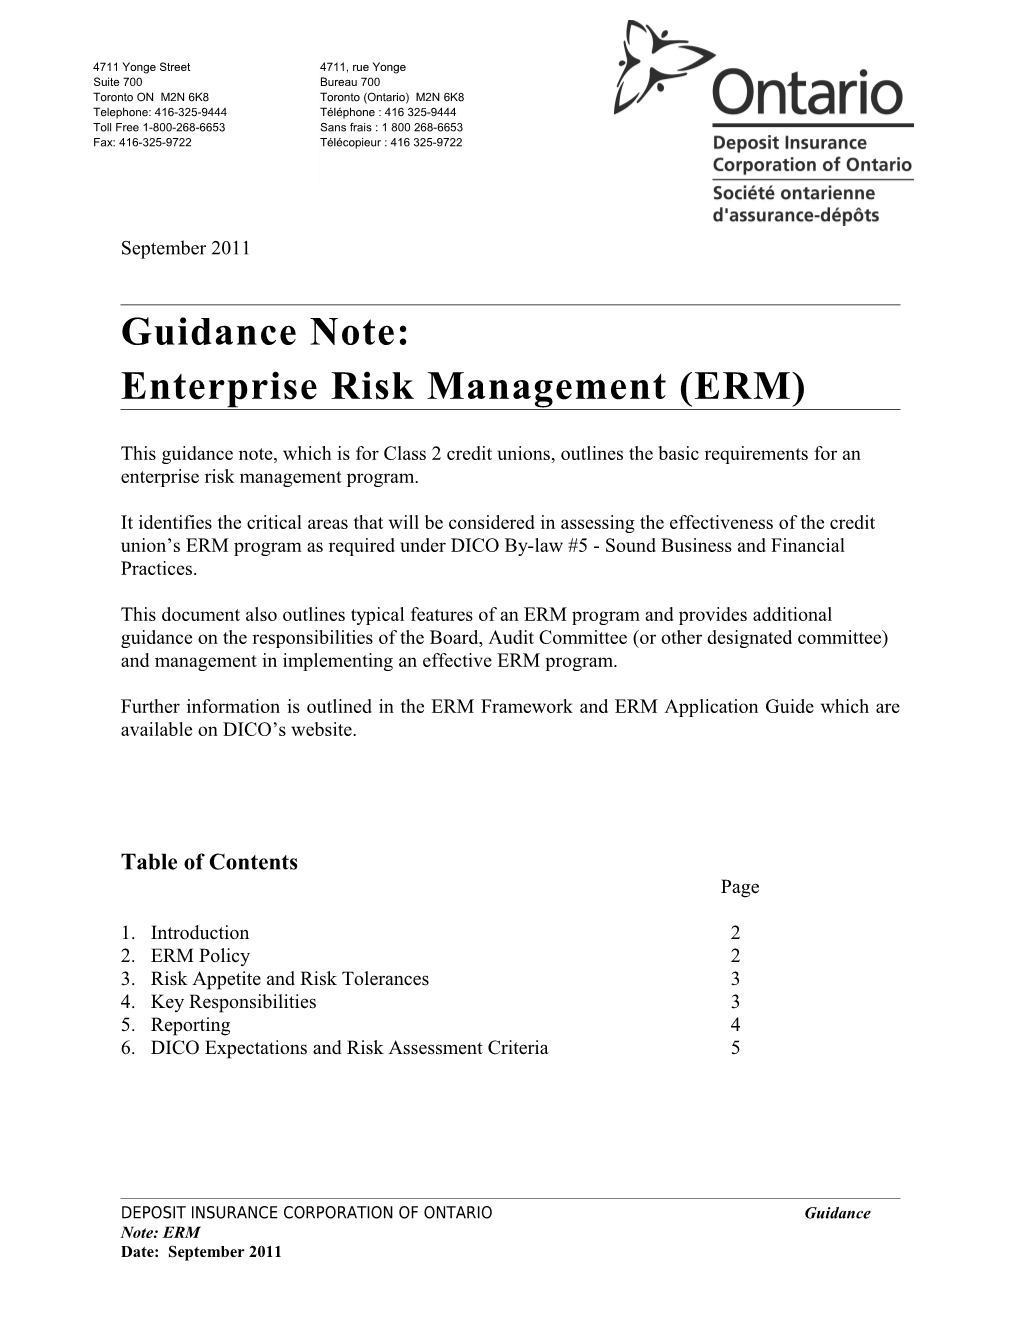 Guidance Note: Structural (Interest Rate) Risk Measurement and Management